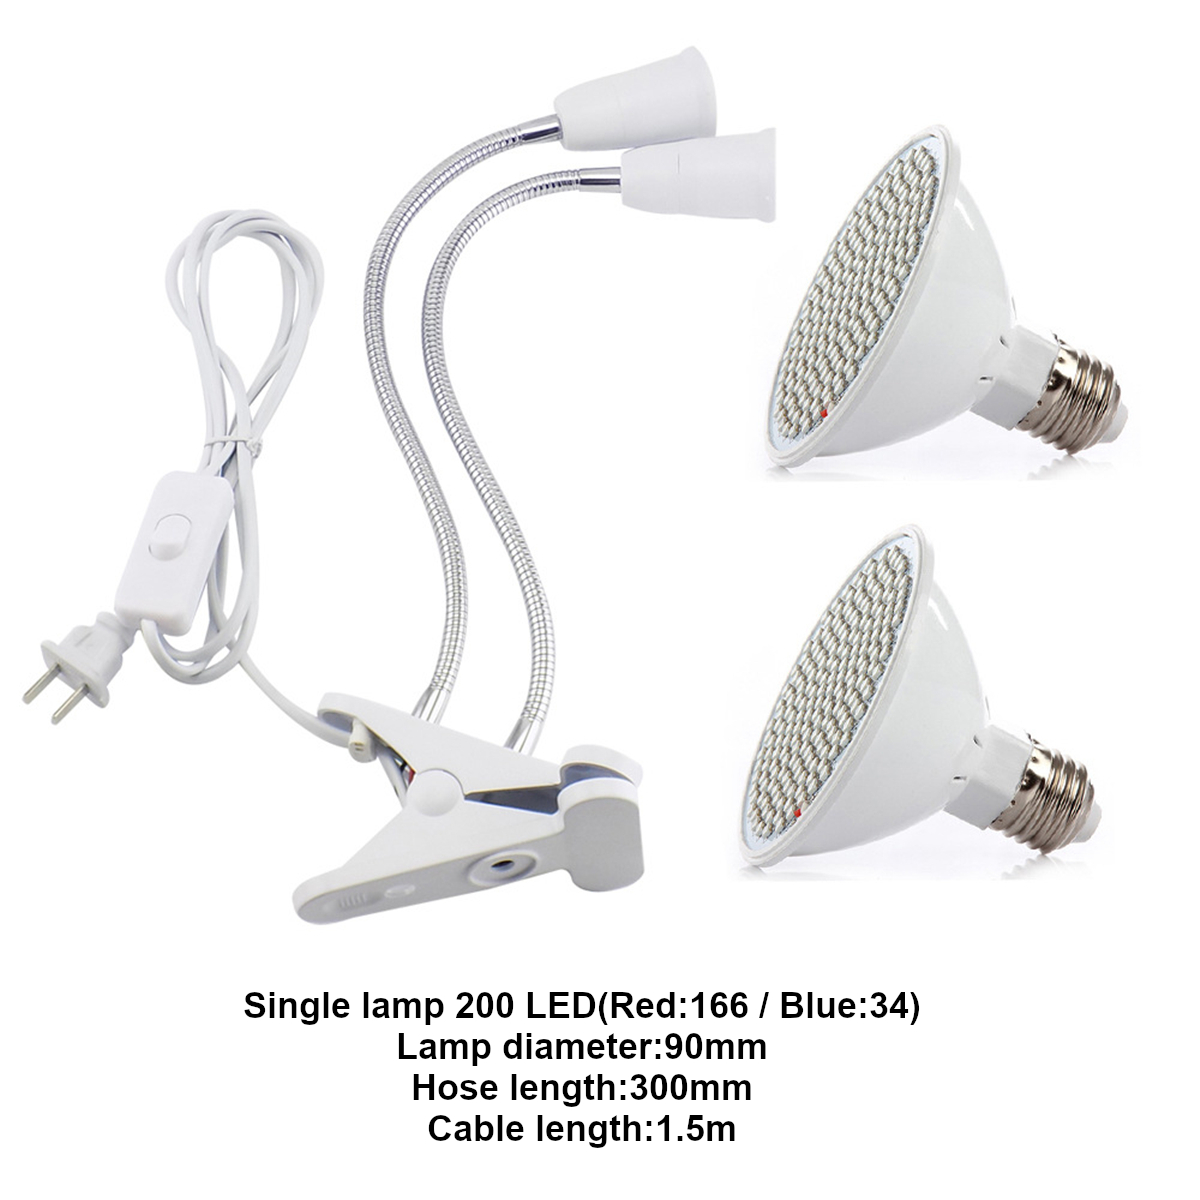 Dual-Heads-20W-LED-Plant-Grow-Light-with-Lamp-Holder-Clip-For-Home-Indoor-Vegetable-Flowers-AC85-265-1723859-4